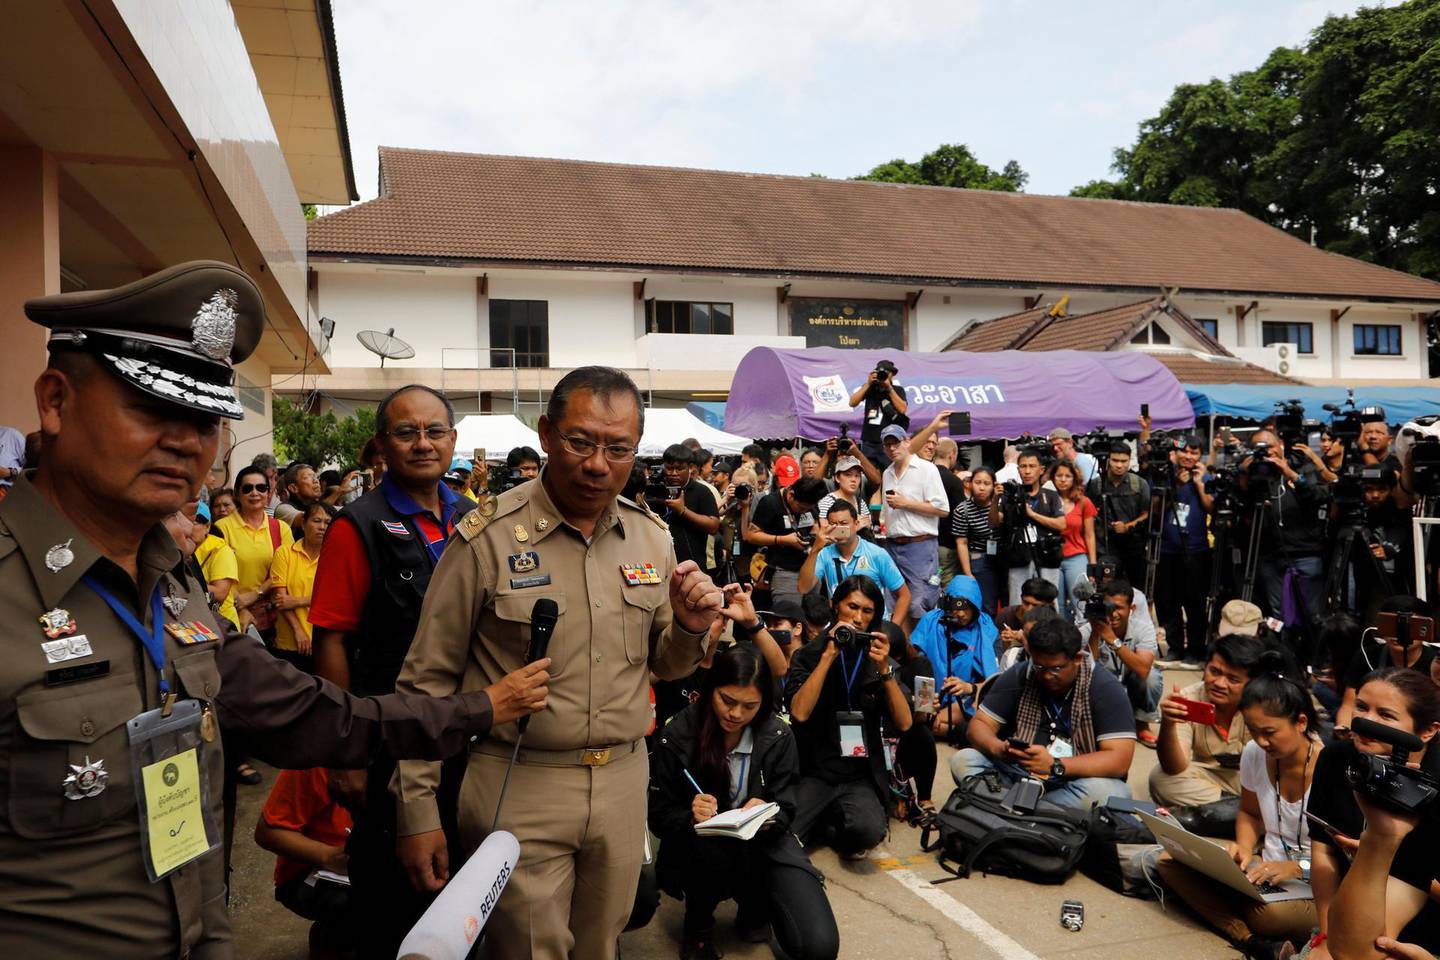 Narongsak Osottanakorn, former governor of Chiang Rai province and the head of the rescue mission, attends a news conference after resuming the mission to rescue a group of boys and their soccer coach trapped in a flooded cave, in the northern province of Chiang Rai, Thailand, July 9, 2018. REUTERS/Tyrone Siu